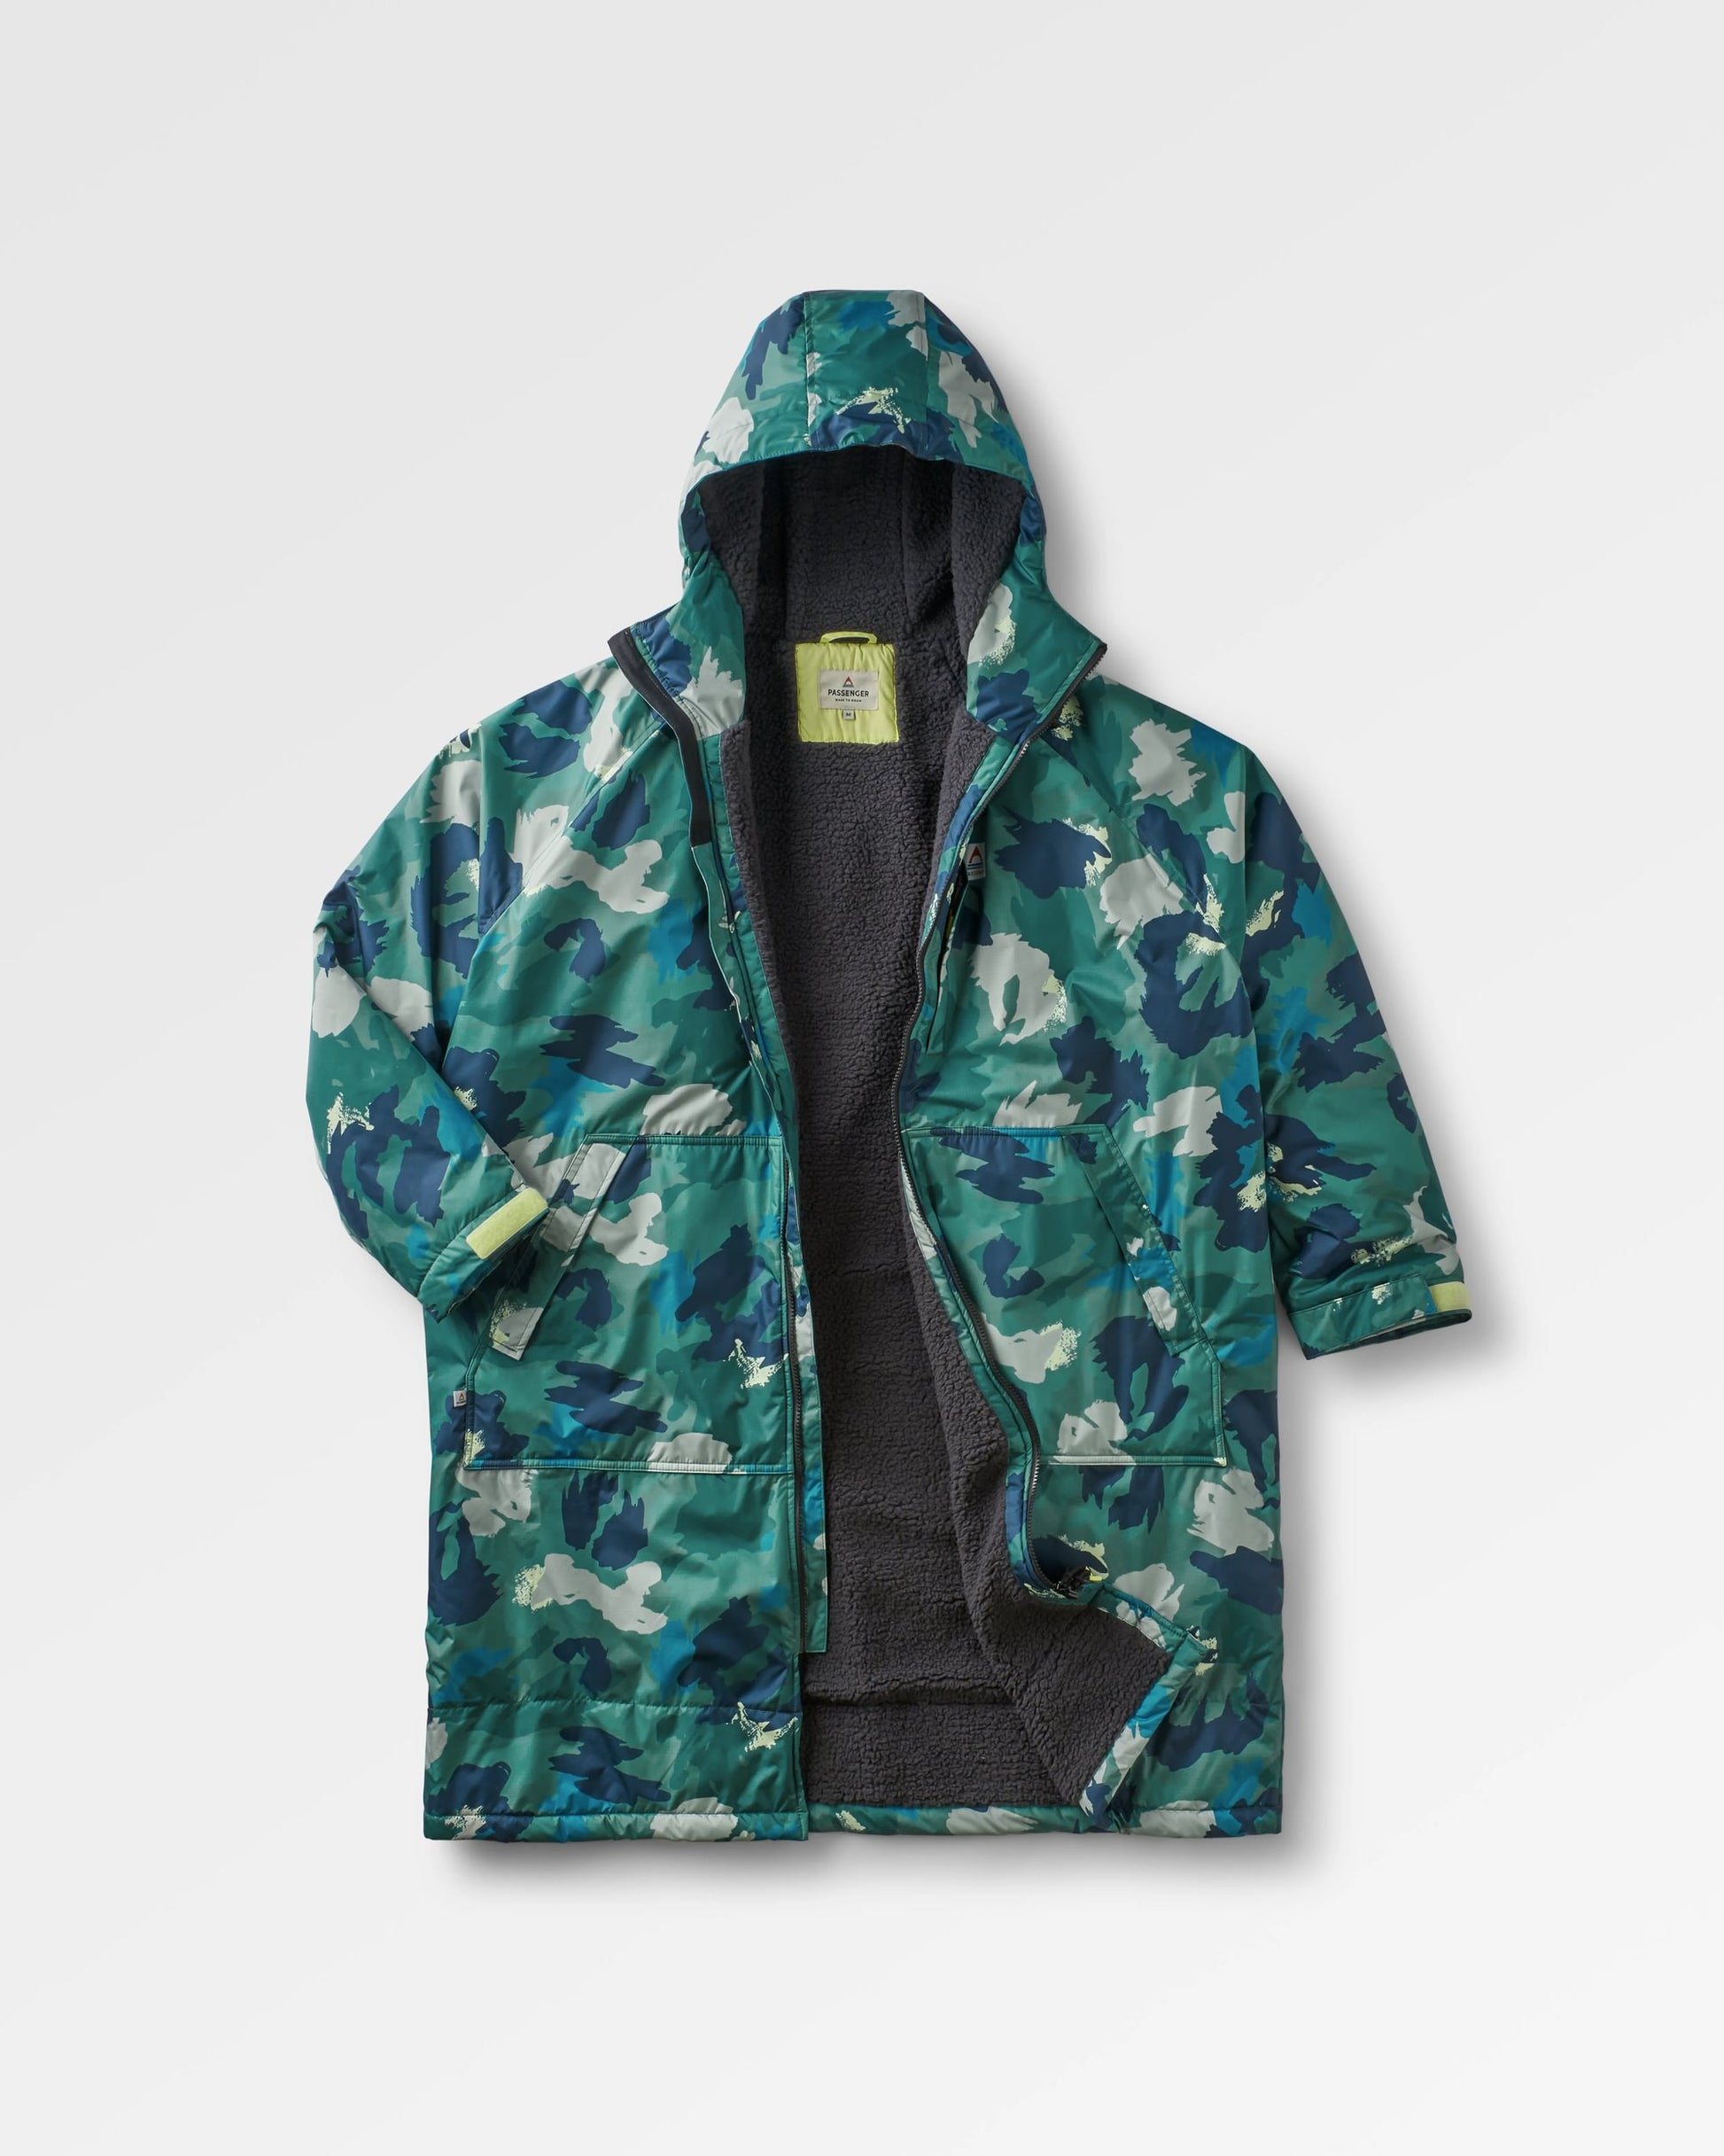 Waves Recycled Sherpa Lined Changing Robe - Alpine Camo Rain Forest